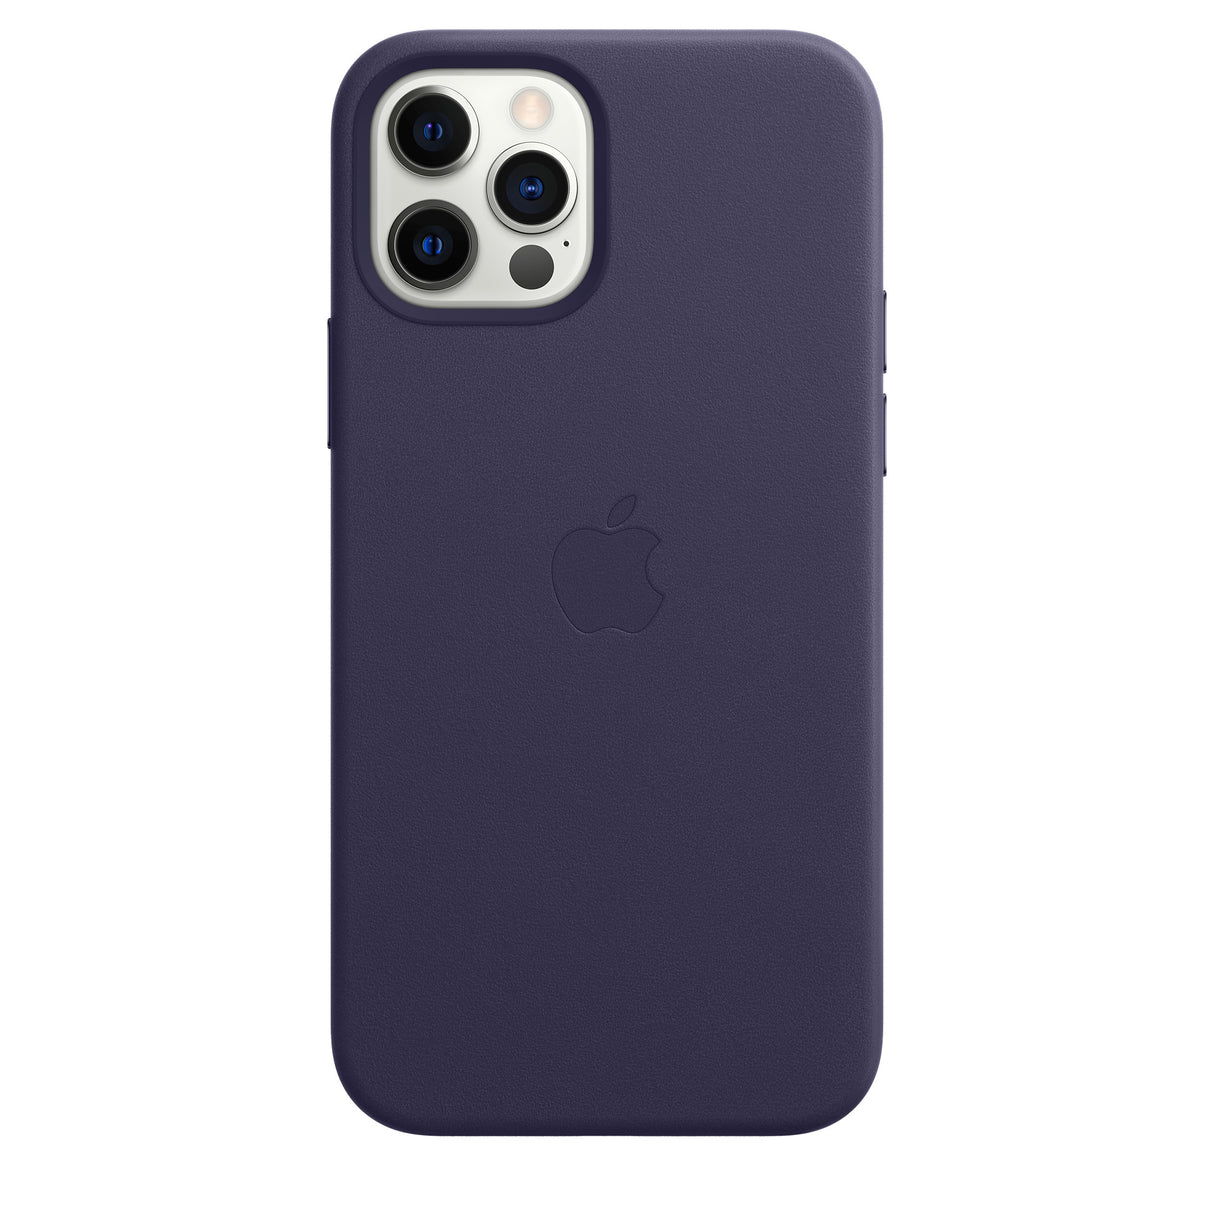 iPhone 12 | 12 Pro Leather Case with MagSafe - Deep Violet OB